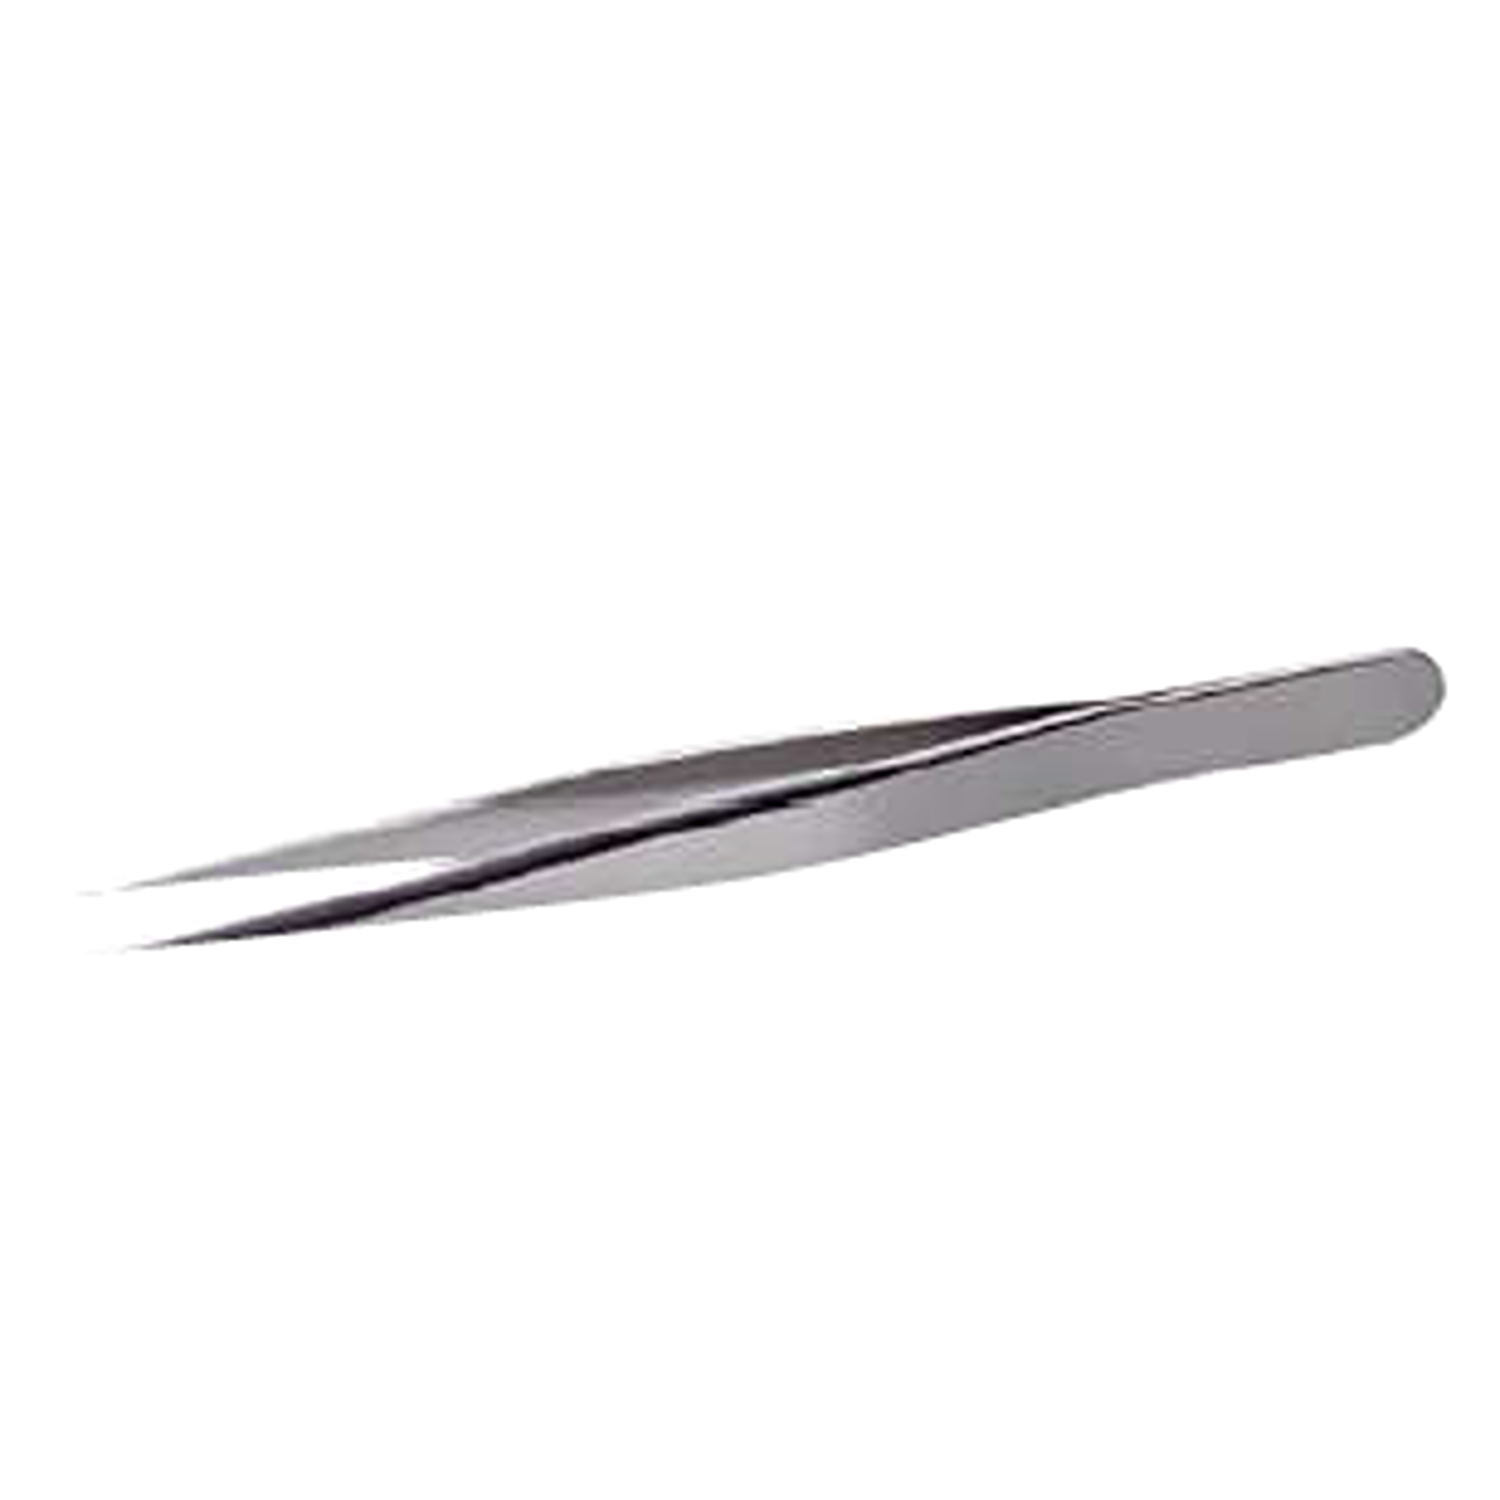 BAHCO TL 0C9-SA Stainless Steel High Precision Tweezers - Premium Tweezers from BAHCO - Shop now at Yew Aik.